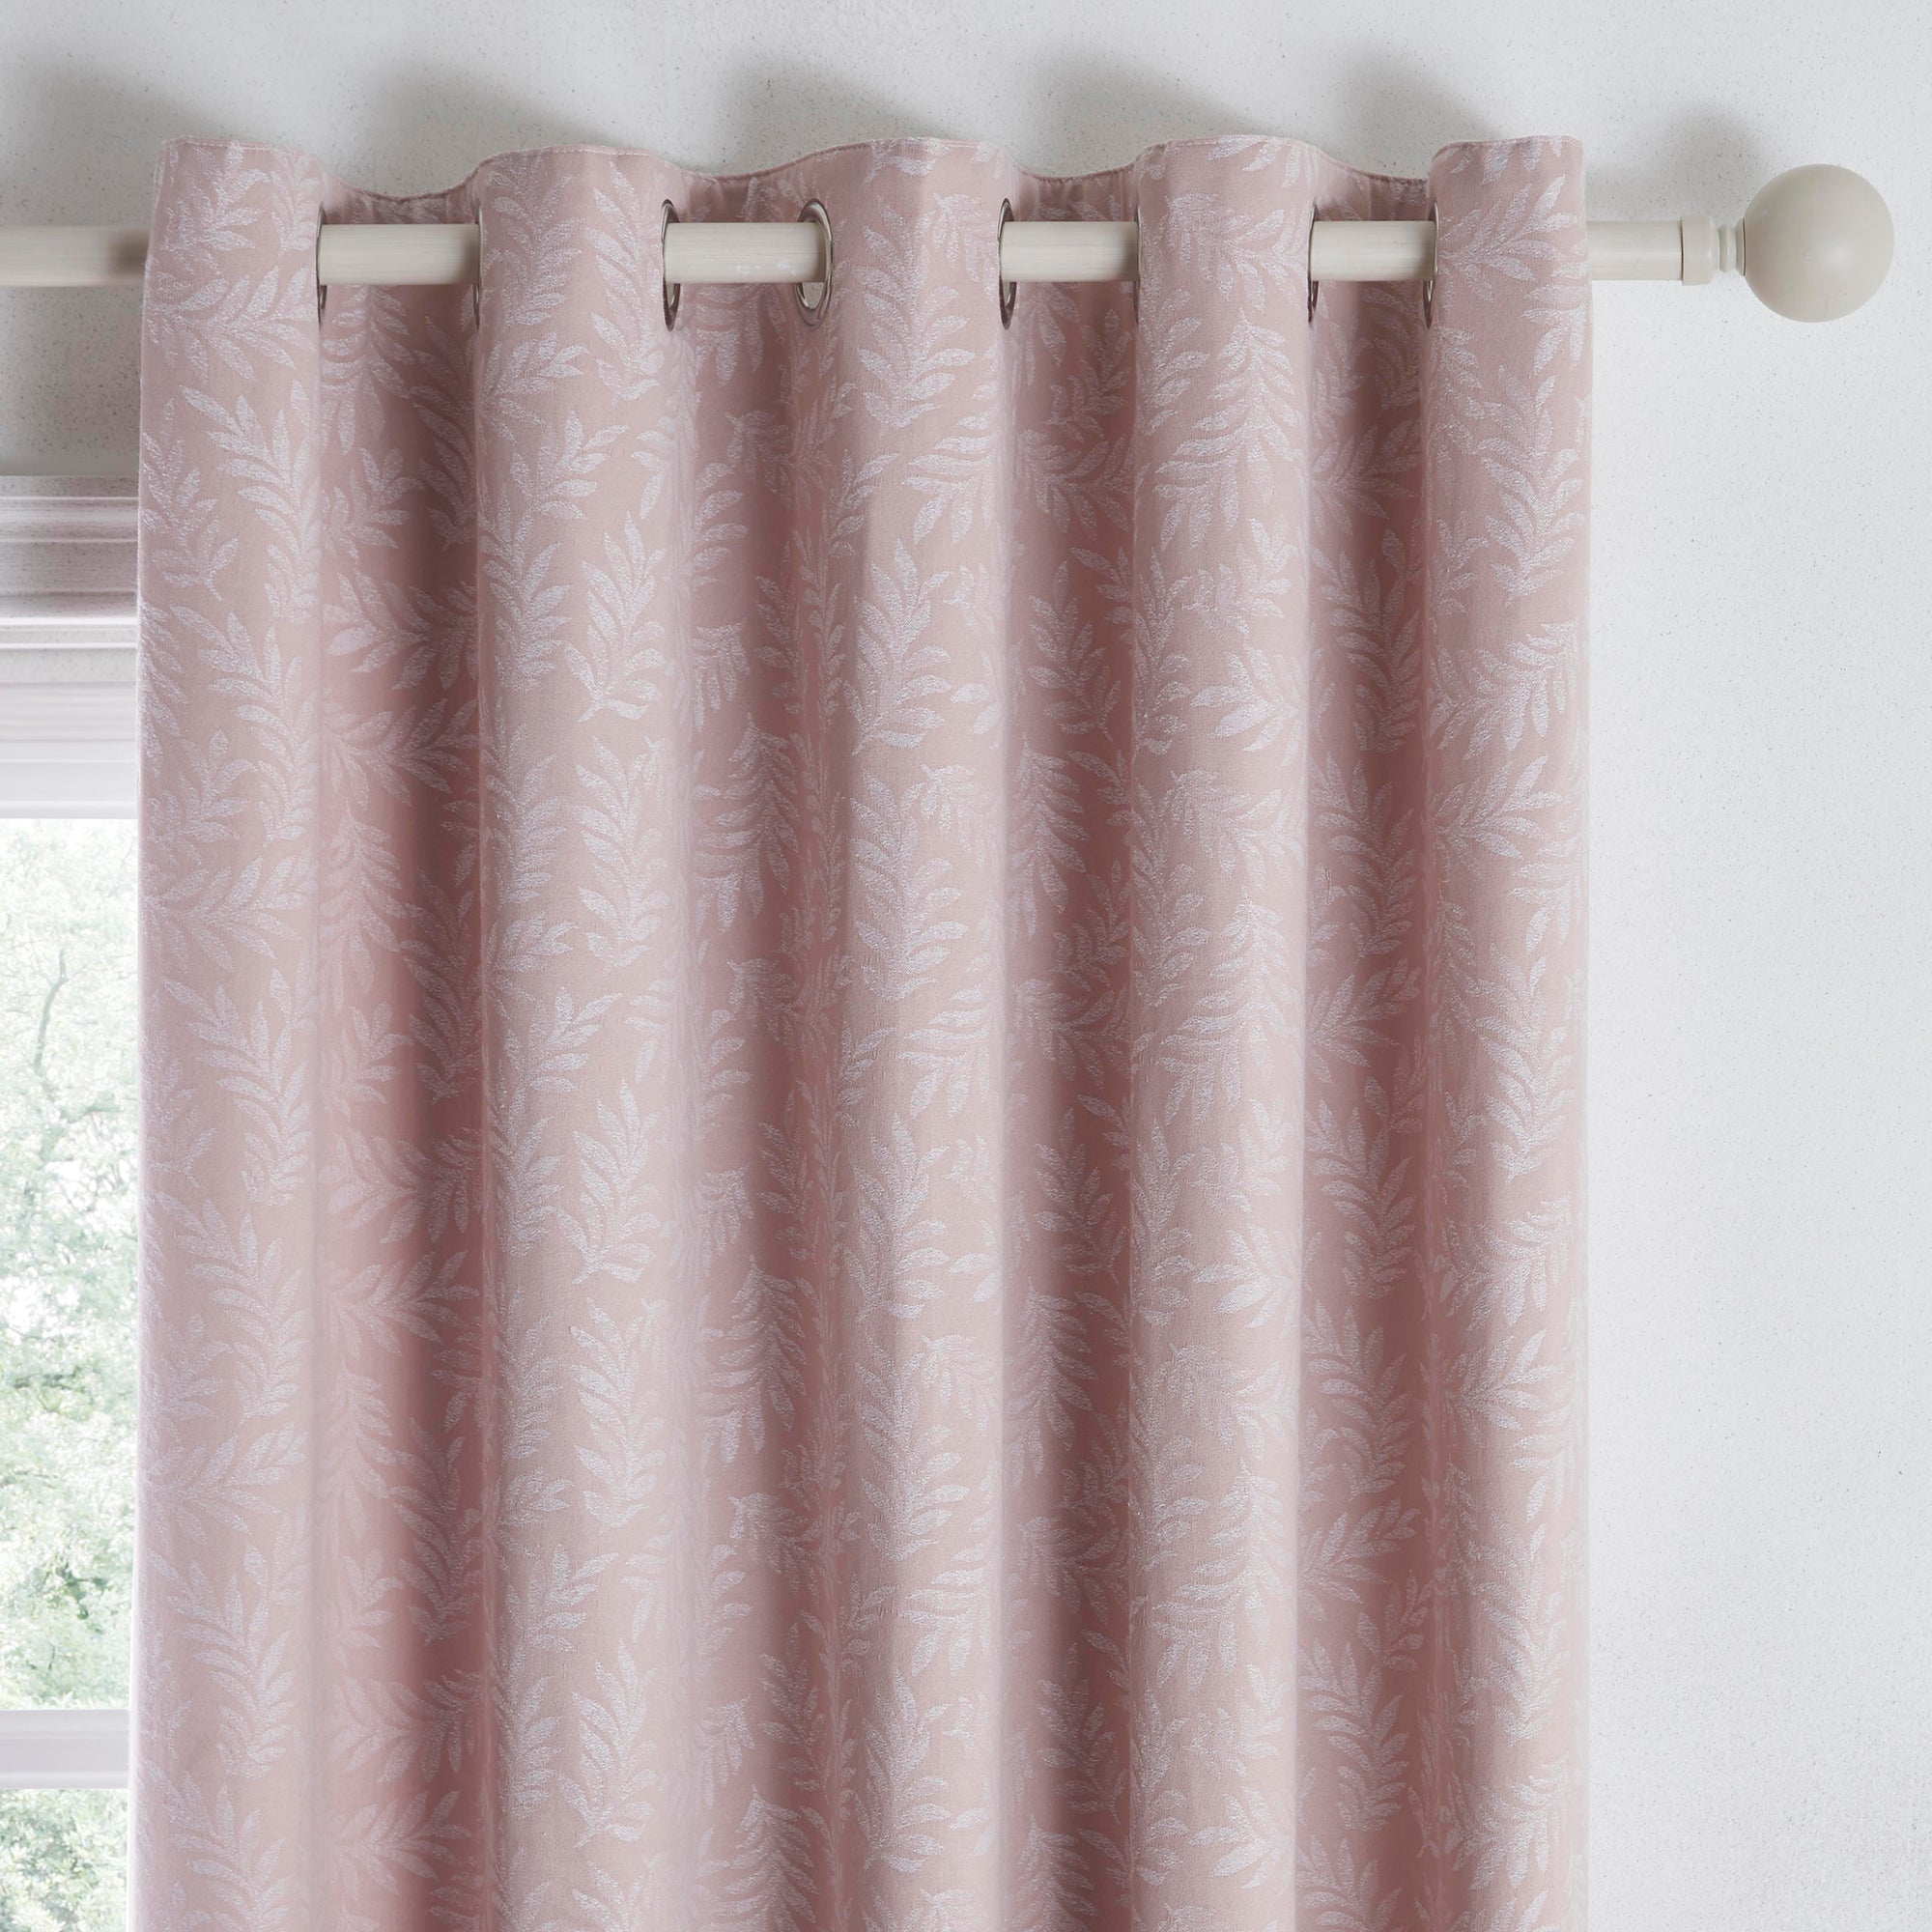 Telford - Jacquard Pair of Eyelet Curtains in Blush - by D&D Design